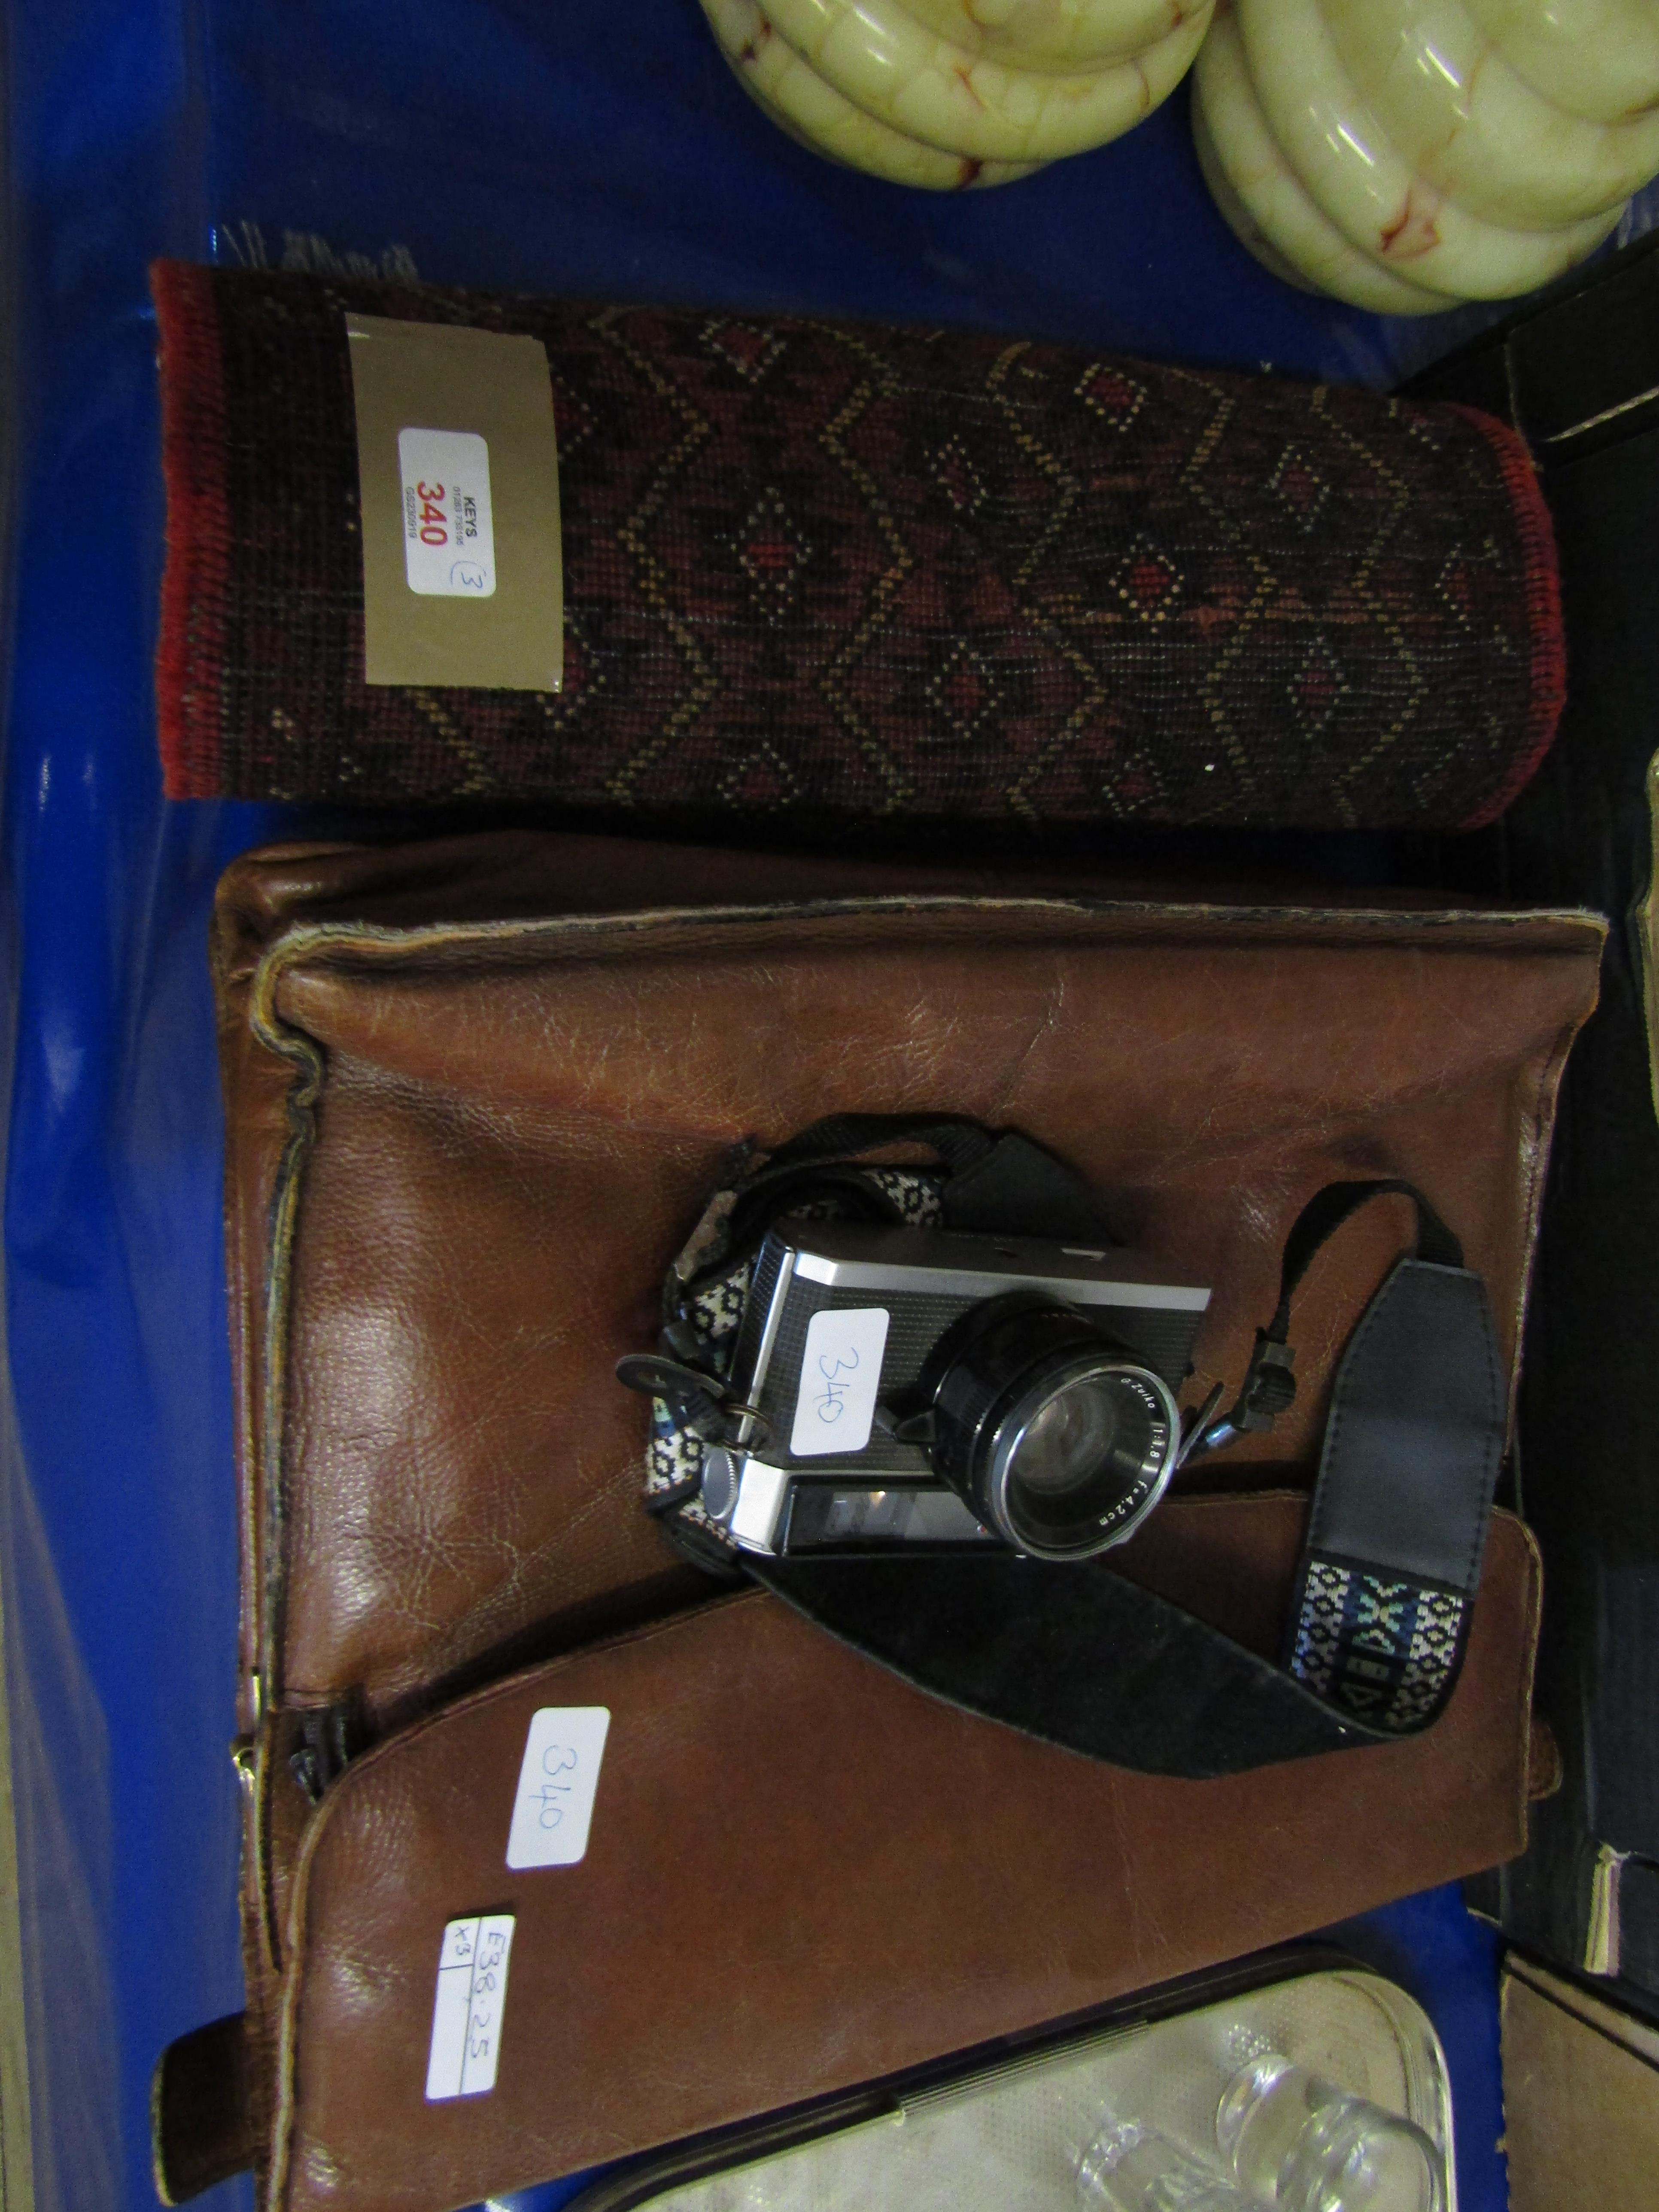 SMALL REPEATING LOZENGE PRAYER RUG, A FURTHER LEATHER SATCHEL AND AN OLYMPUS-S CAMERA